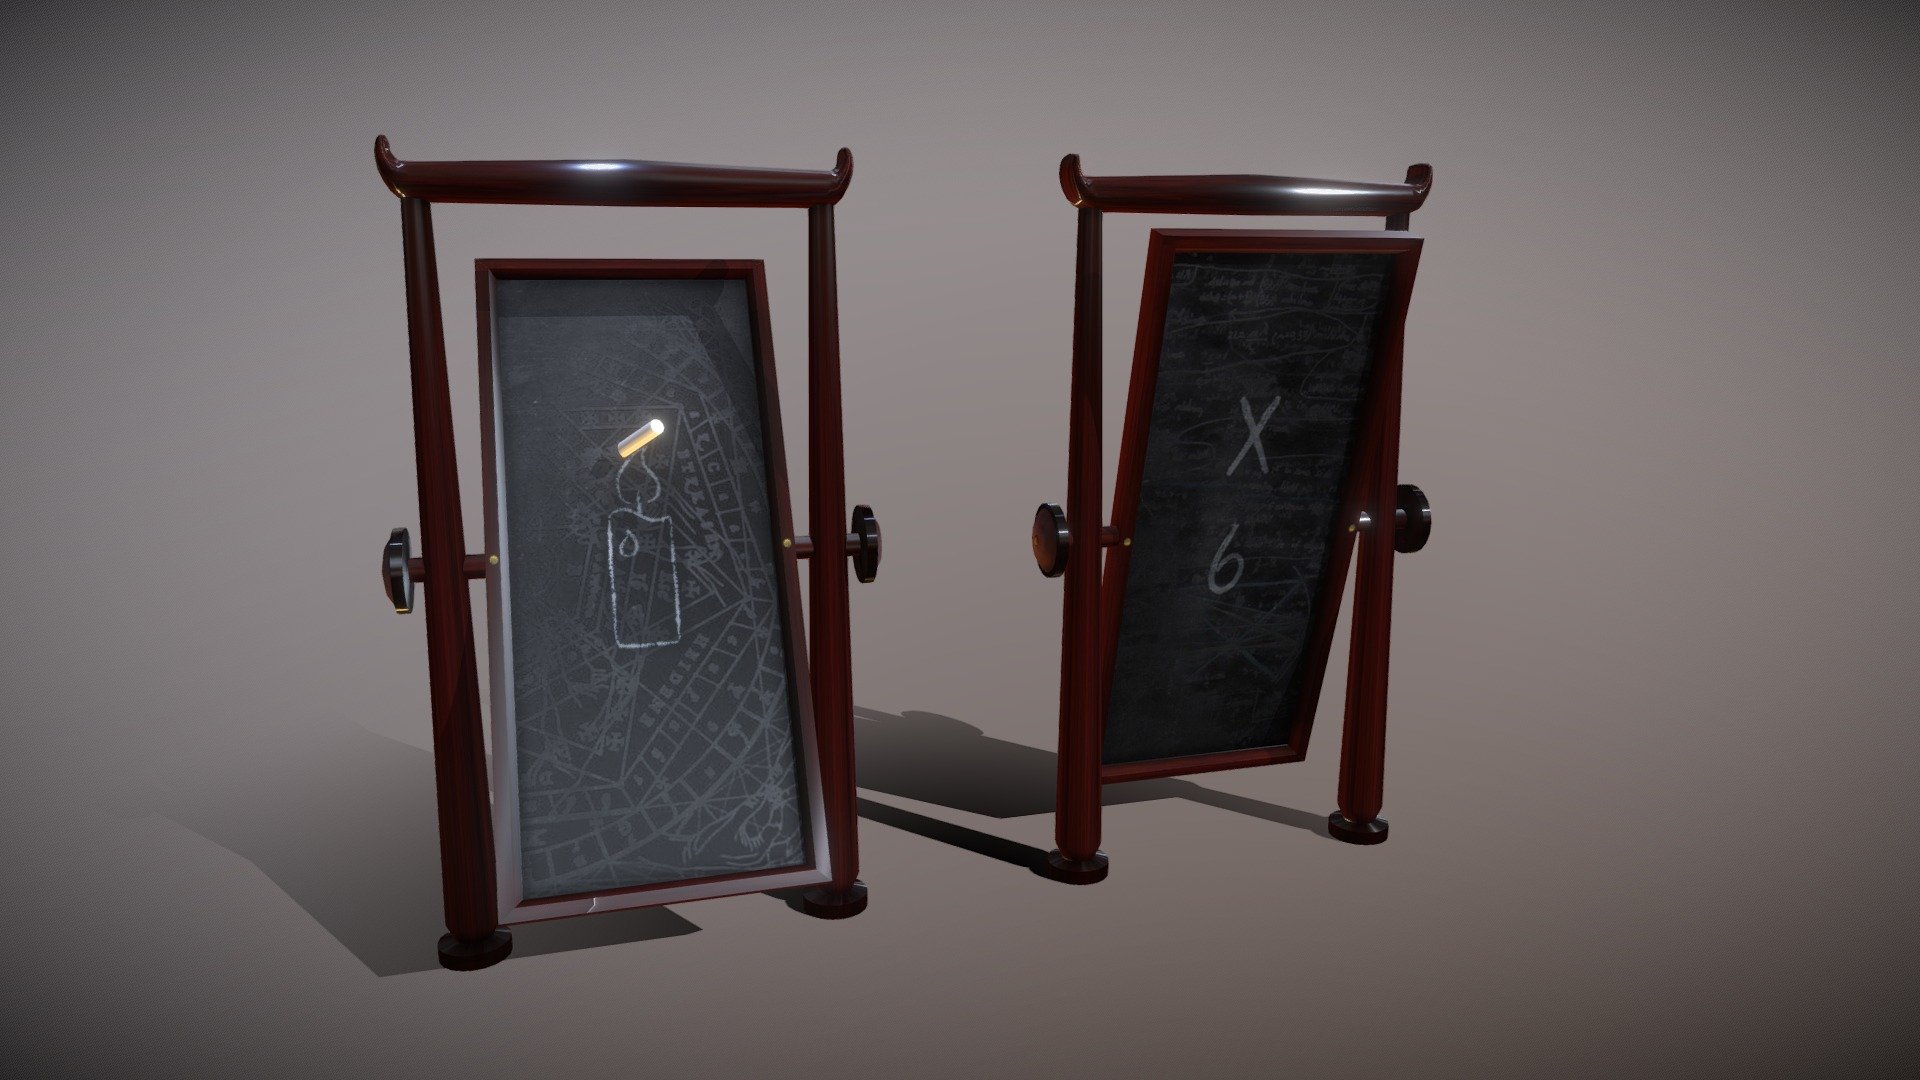 Class example clue item (rotatable chalboard) for a VR Escape Room game project 3d model